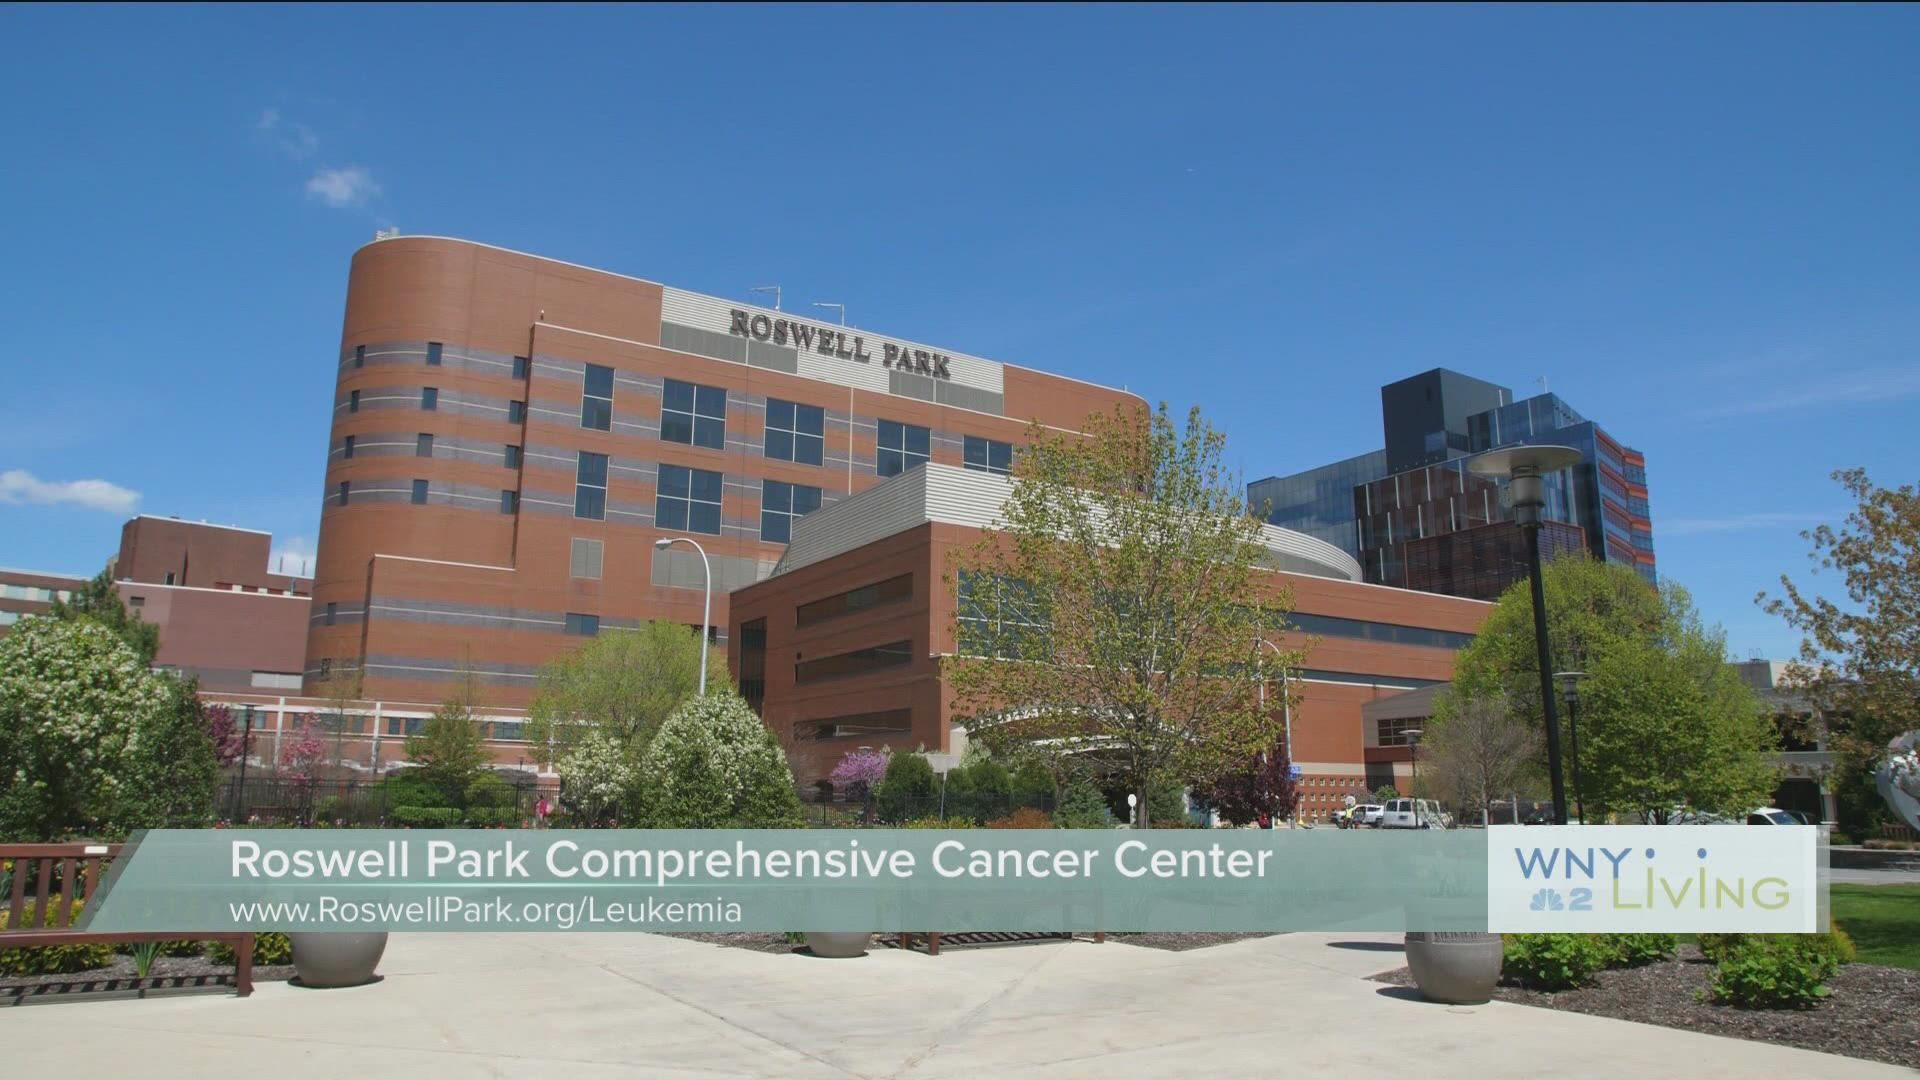 WNY Living - September 10 - Roswell Park Comprehensive Cancer Center (THIS VIDEO IS SPONSORED BY ROSWELL PARK COMPREHENSIVE CANCER CENTER)